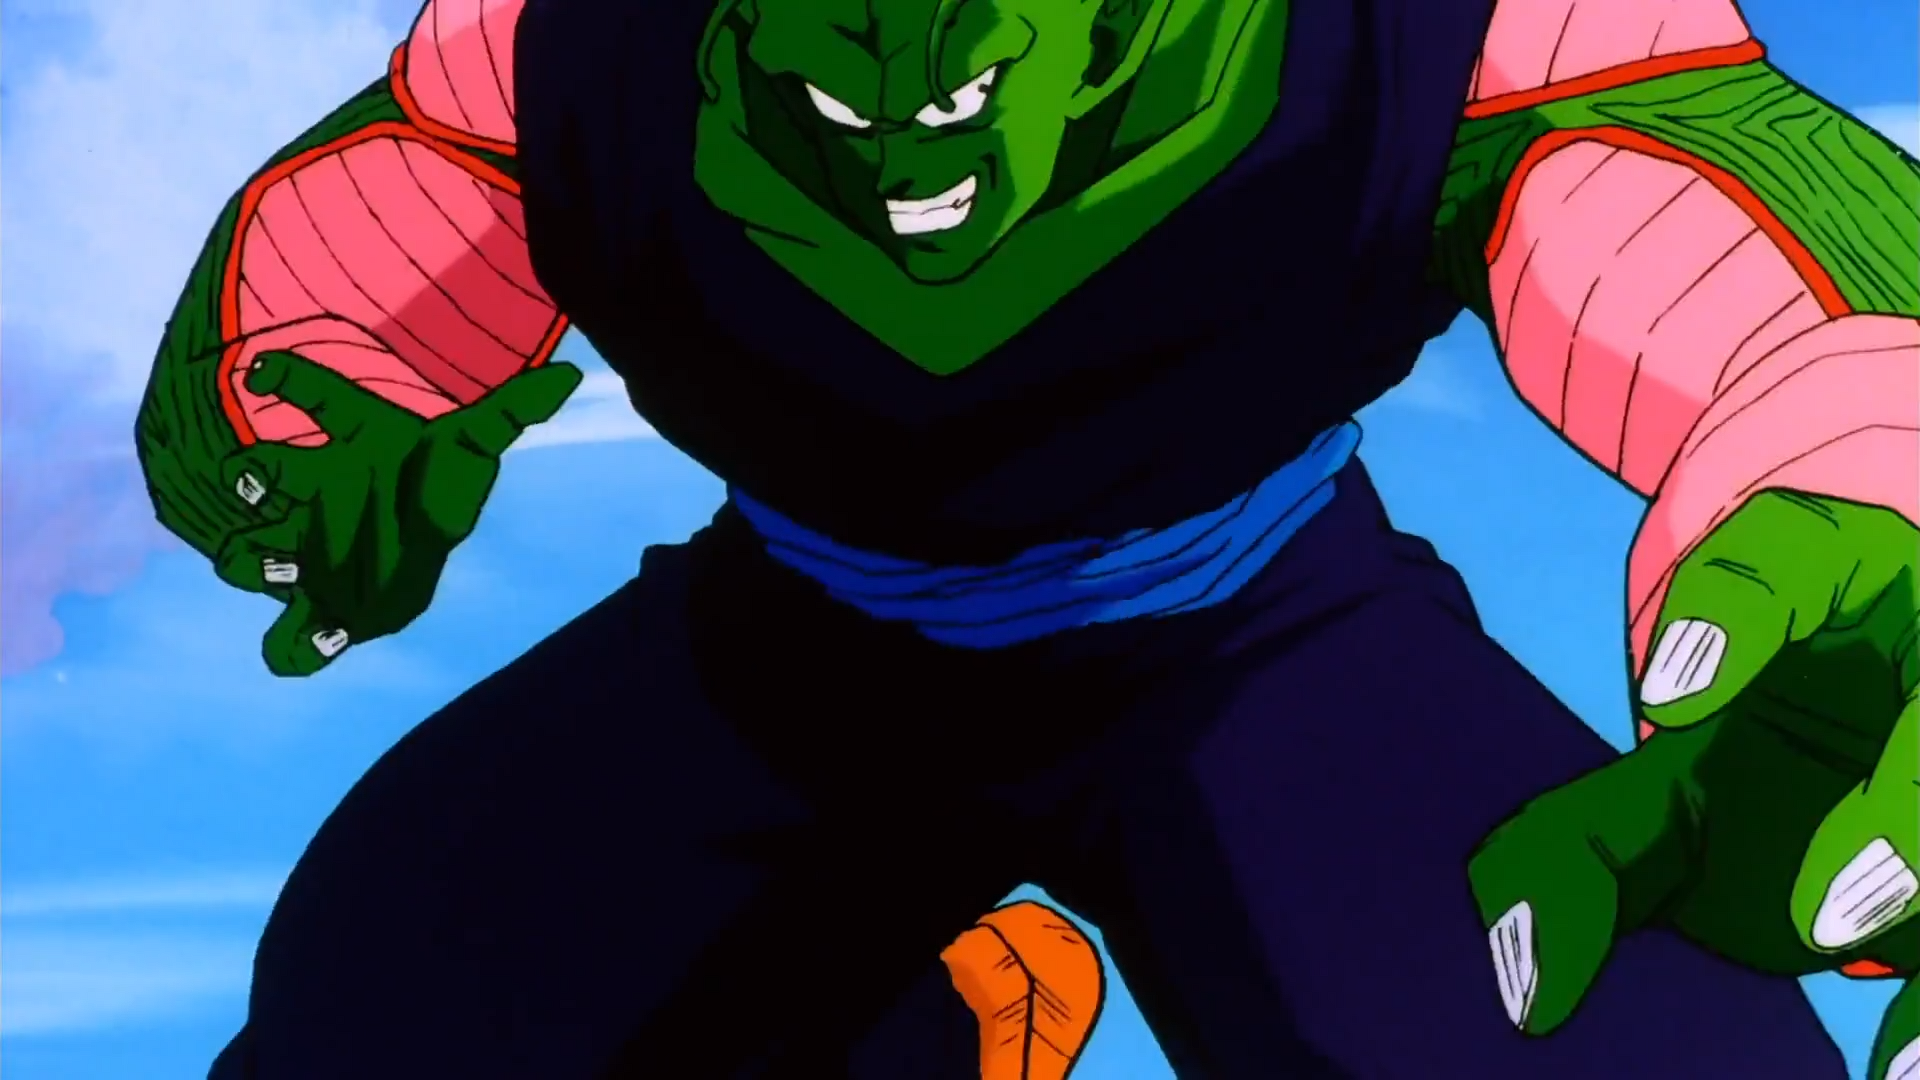 Replying to @user9czxkhbq4a Excellence from piccolo💯💯 #phangito #pi, Dragon  Ball